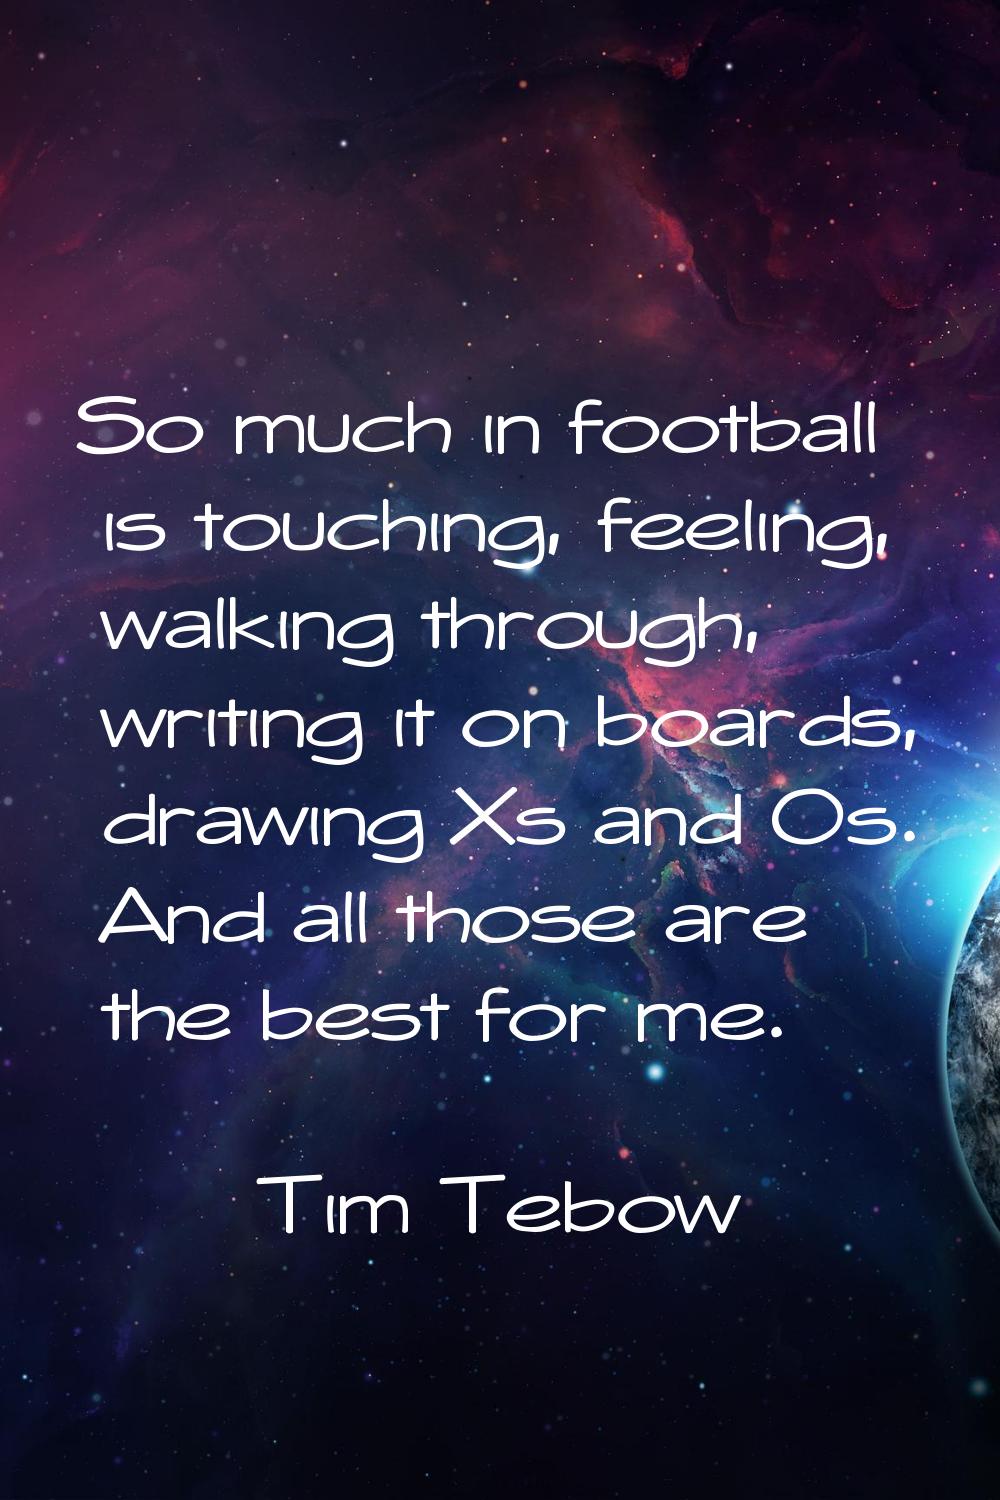 So much in football is touching, feeling, walking through, writing it on boards, drawing Xs and Os.